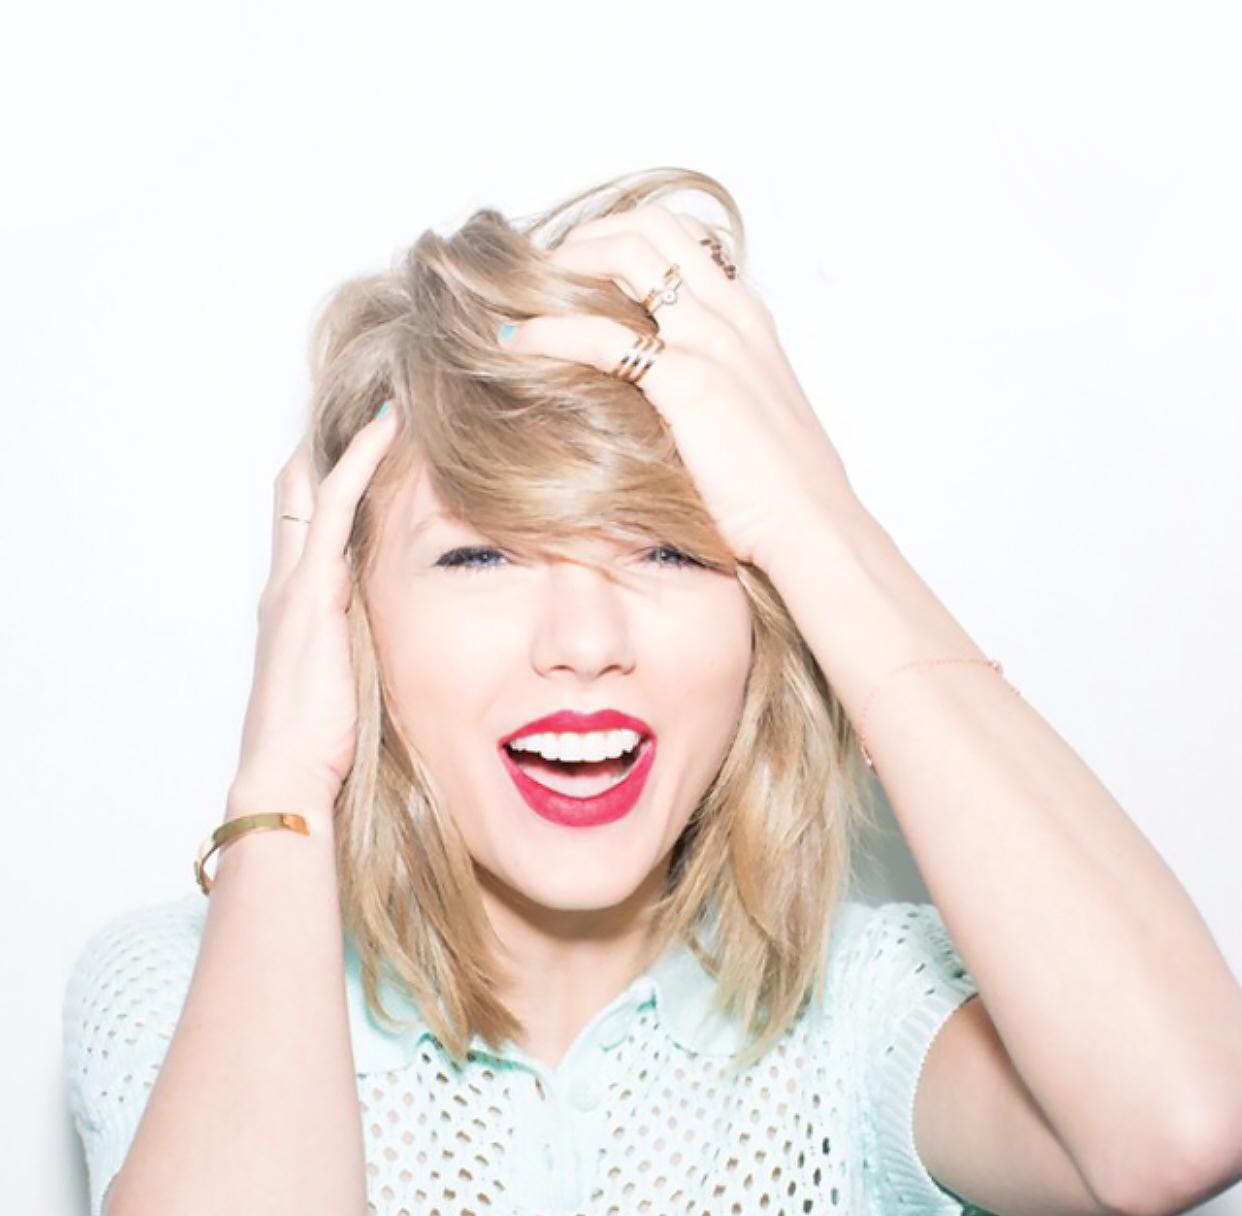 download taylor swift 1989